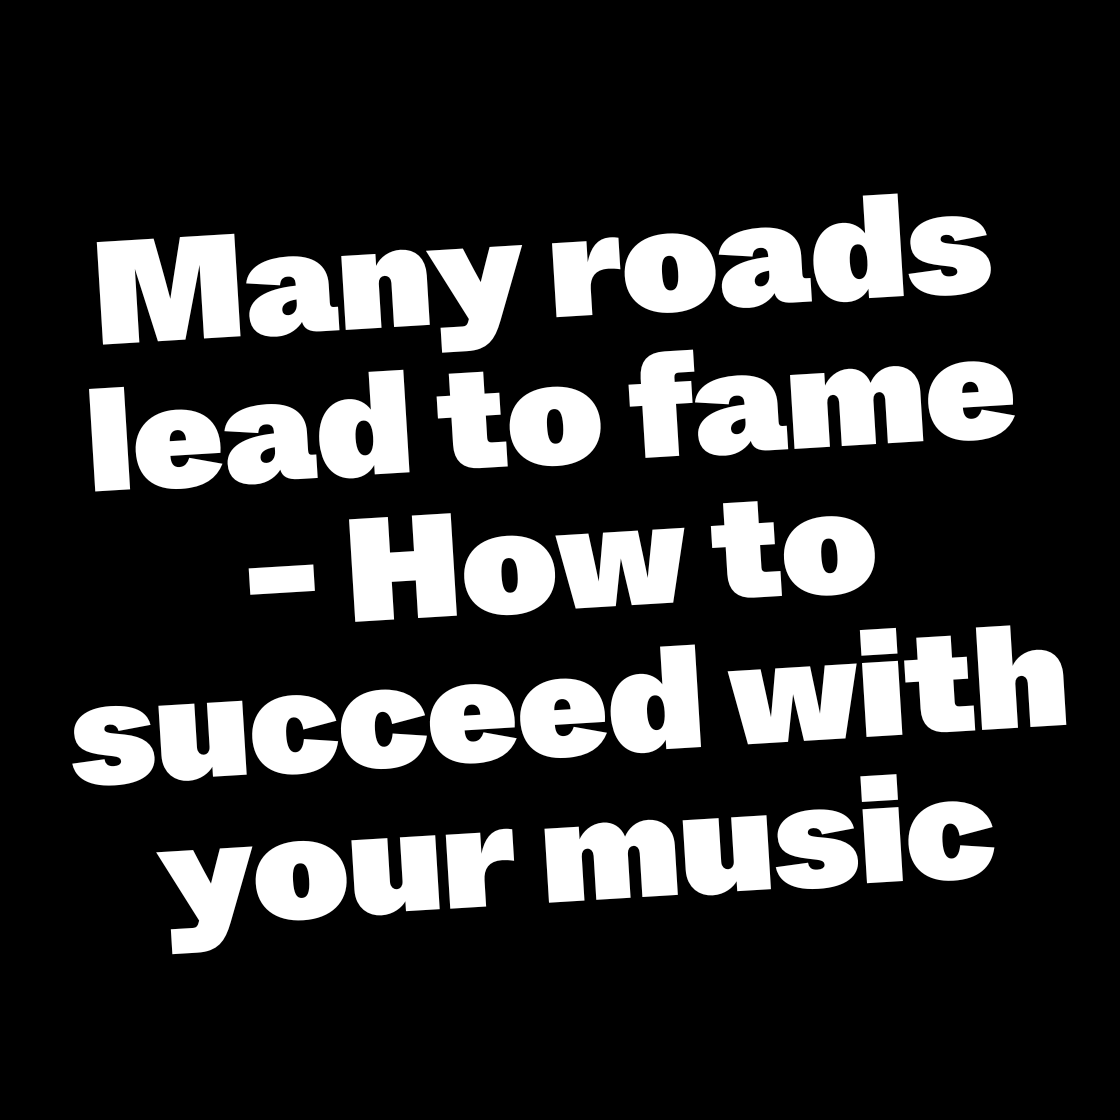 Many roads lead to fame